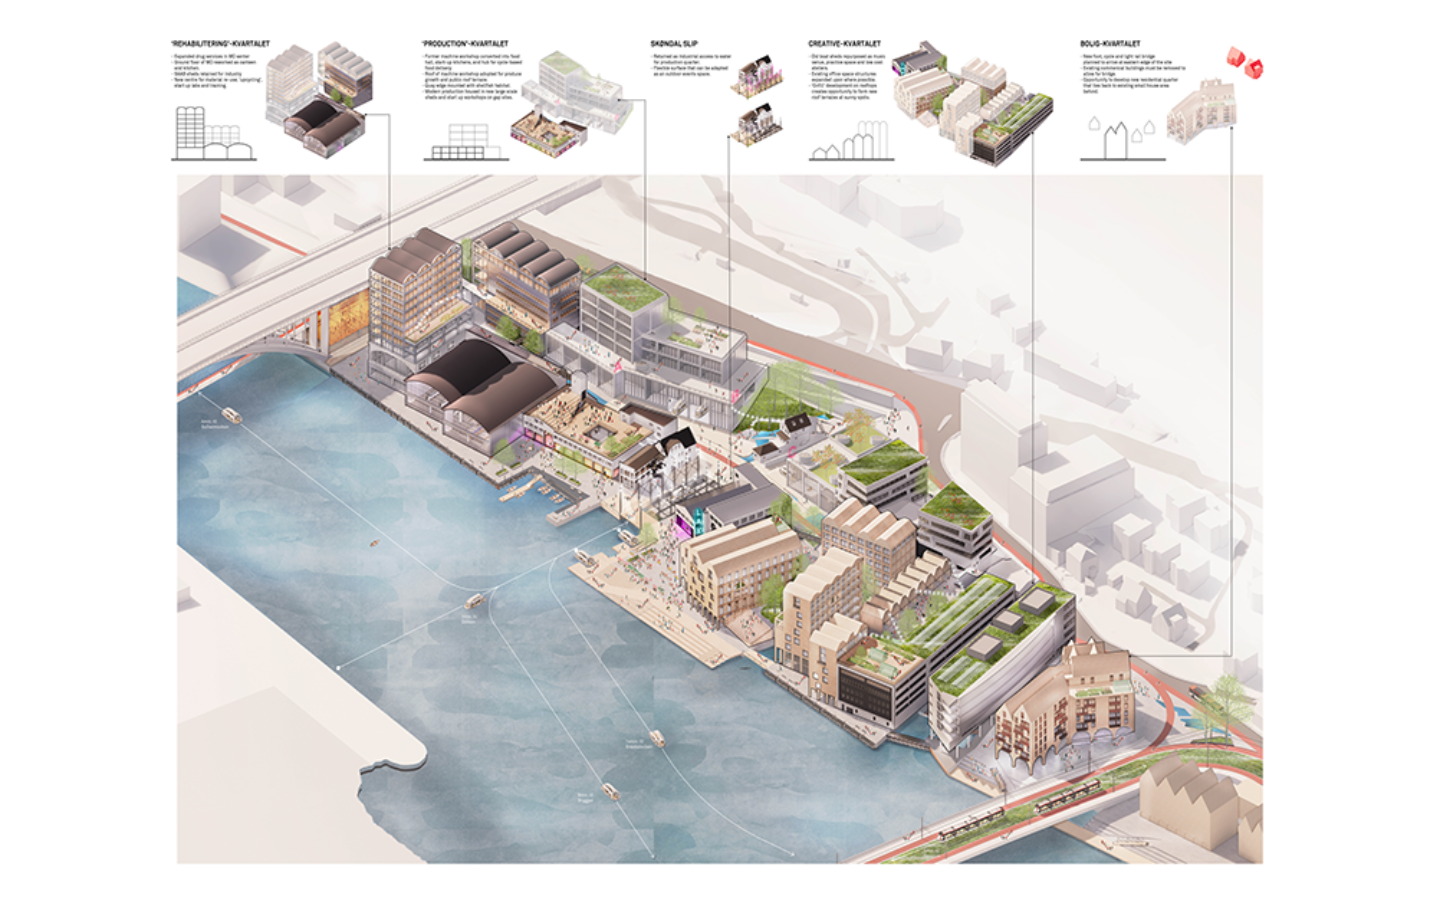 LAX Laksevåg wins the Architectural Review's Future Projects Award 2022